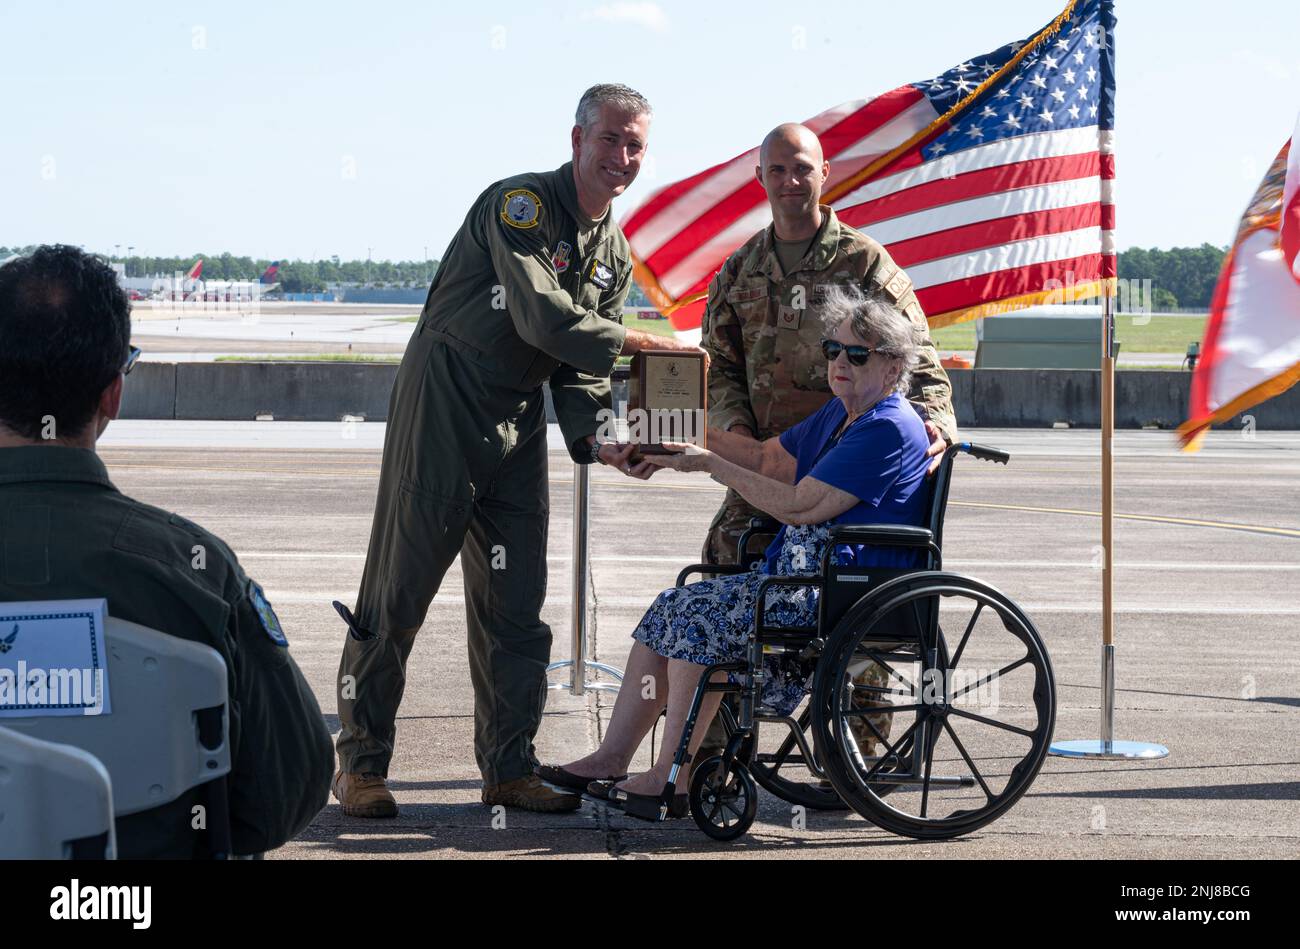 Glenda Bryant, wife of retired Lt. Col. Melvin “Mel” Bryant, left, passes off a bottle of scotch to U.S. Air Force Col. George Watkins, 325th Fighter Wing commander, right, beside her grandson, back left, during a dedication ceremony at Eglin Air Force Base, Florida, August 6, 2022. The 101-year-old bottle was donated to the 325th Fighter Wing by Glenda as a keepsake from World War II, honoring the 2nd Pursuit Squadron. Stock Photo